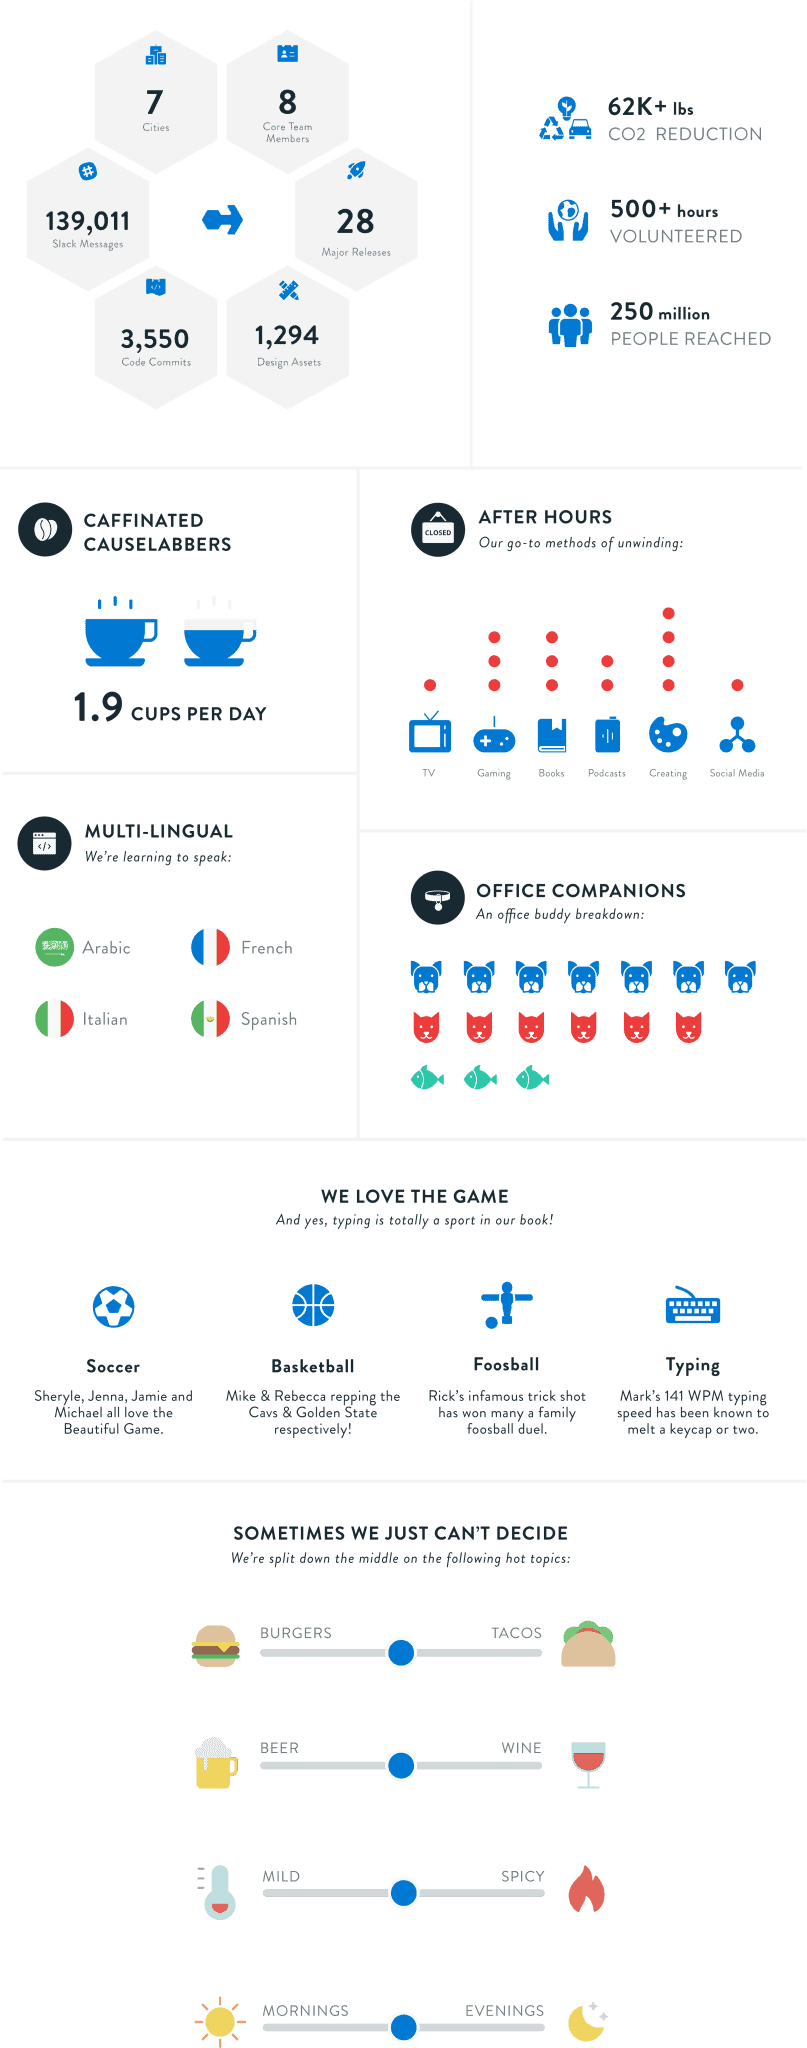 An infographic displaying CauseLabs team data.